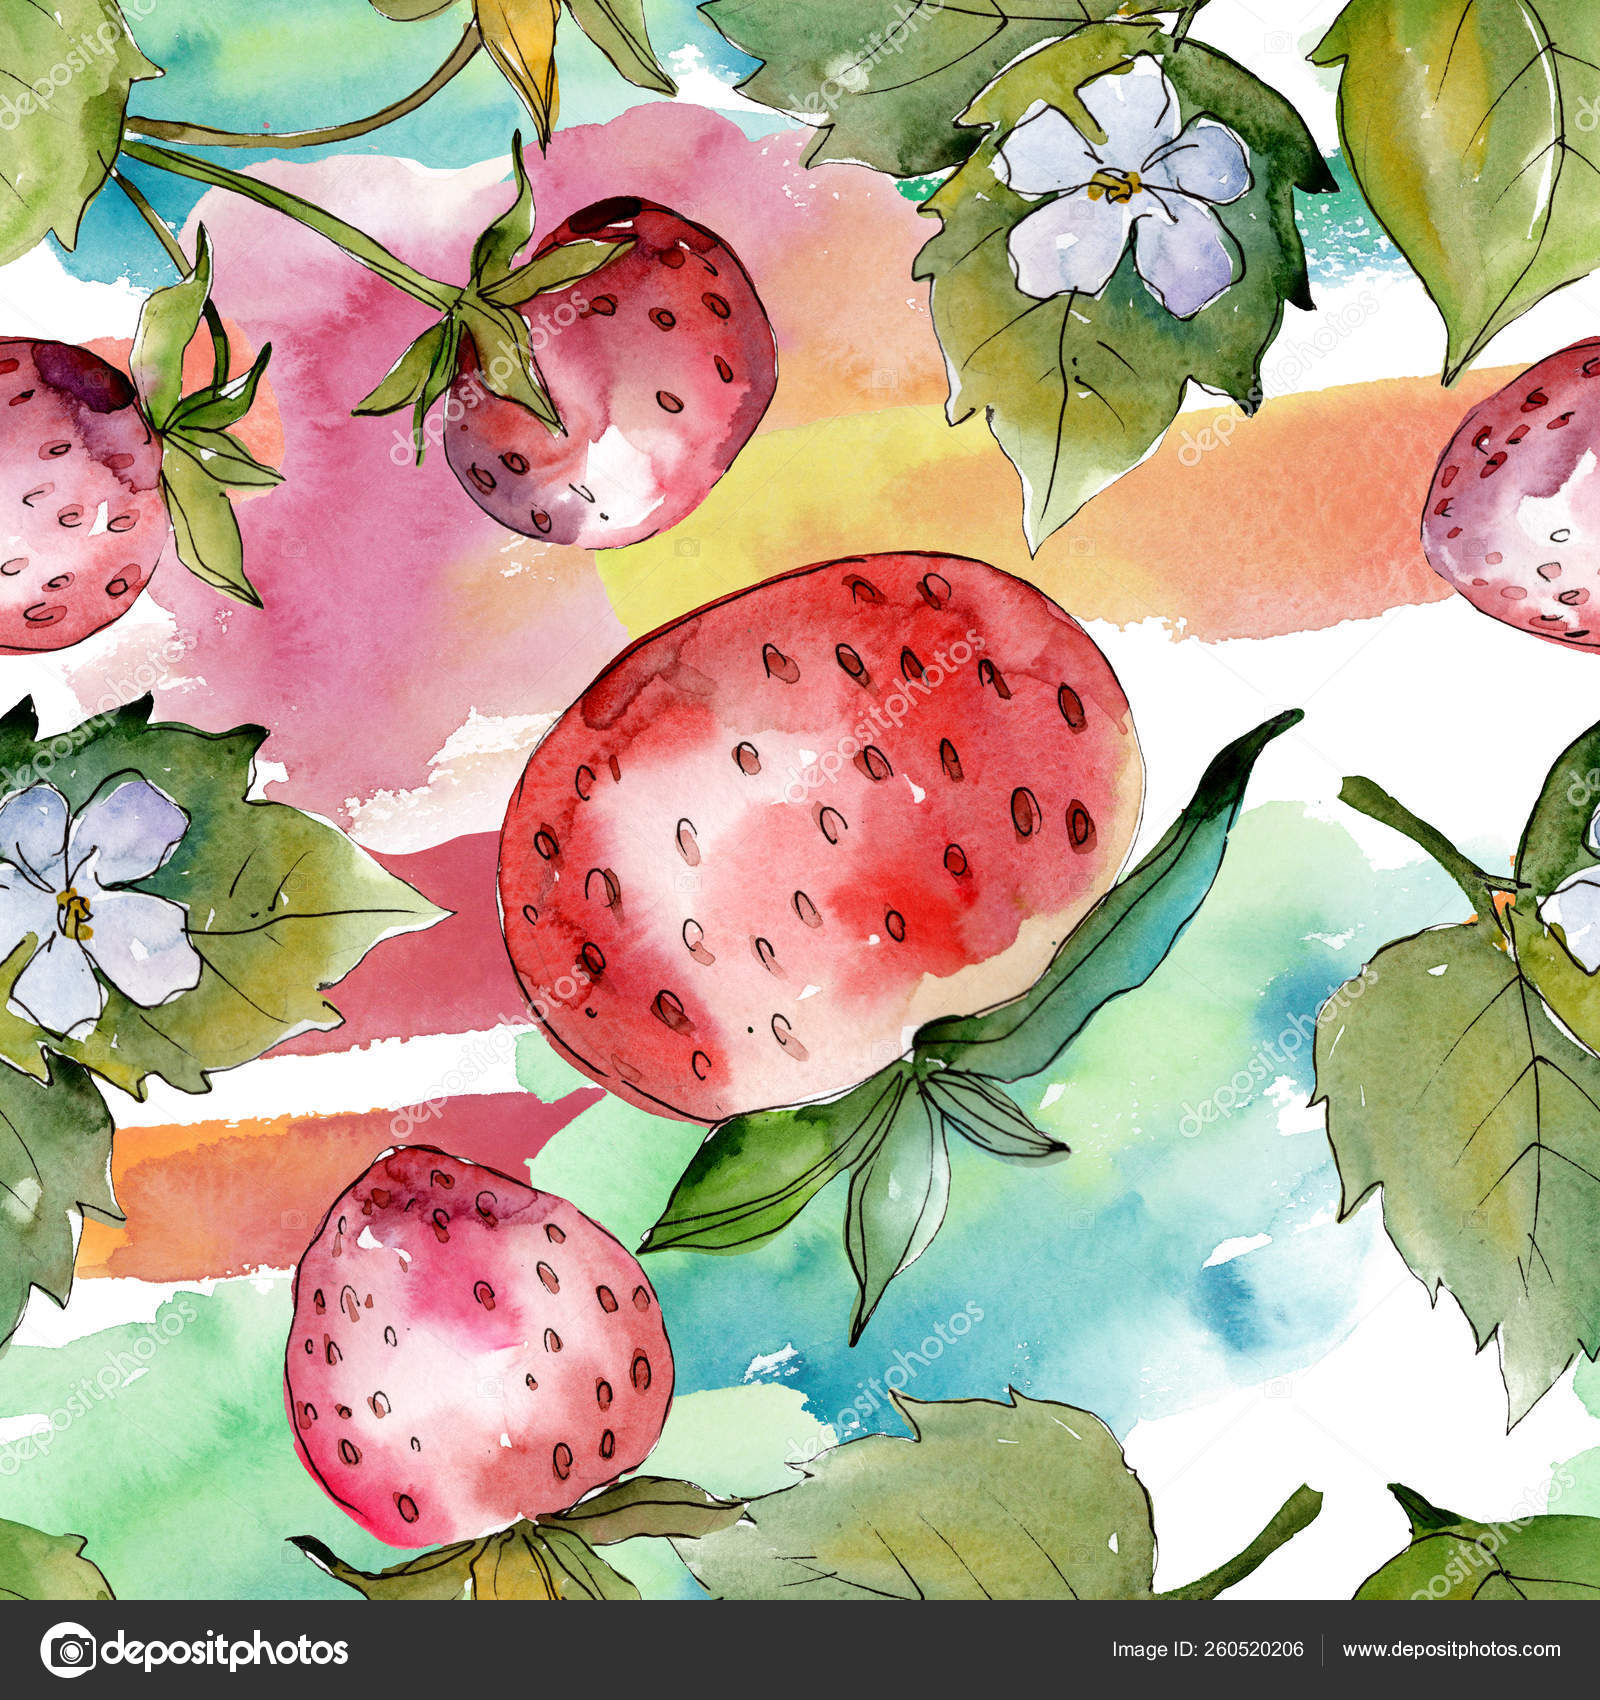 Strawberry Fabric Watercolor Wild Strawberries, Fruit, Berry